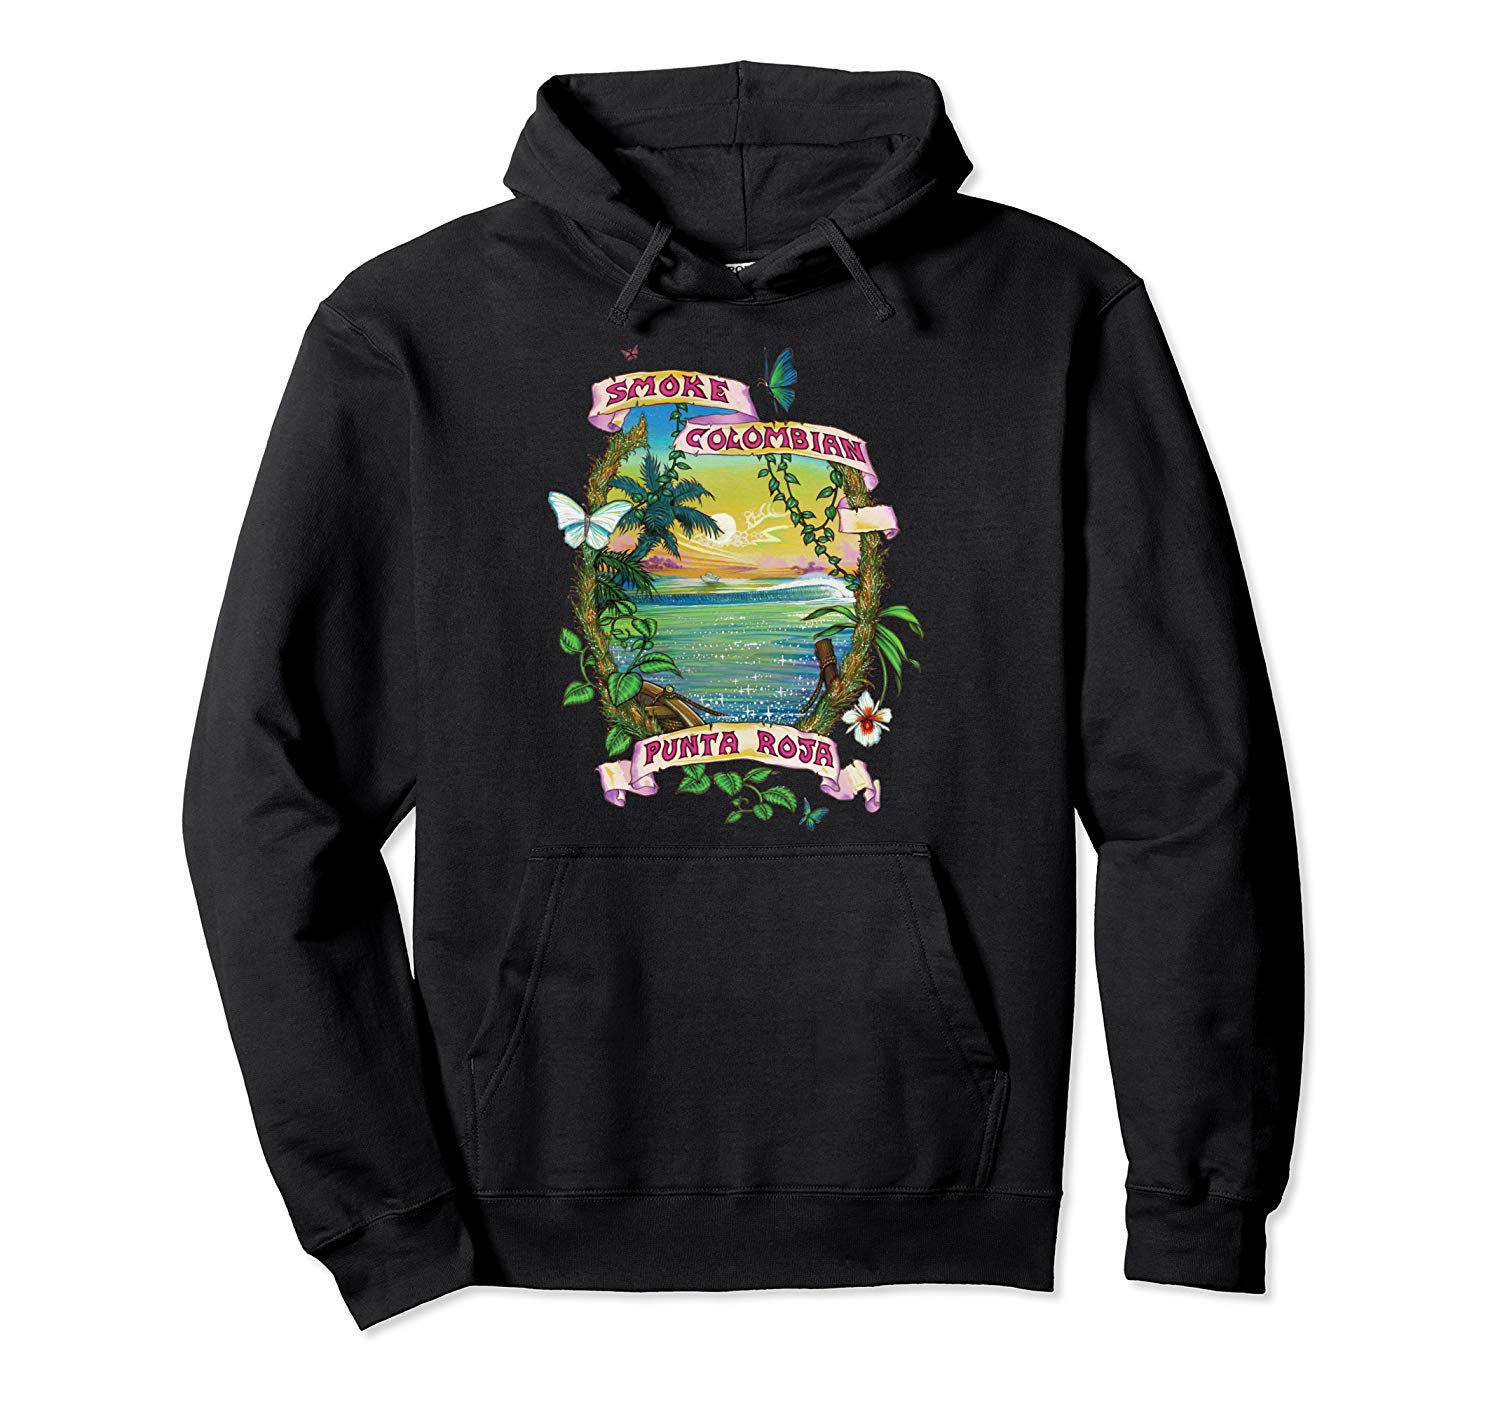 Image of a black colored Smoke Colombian Red Bud Vintage Marijuana Hoodie from Ganja Outpost